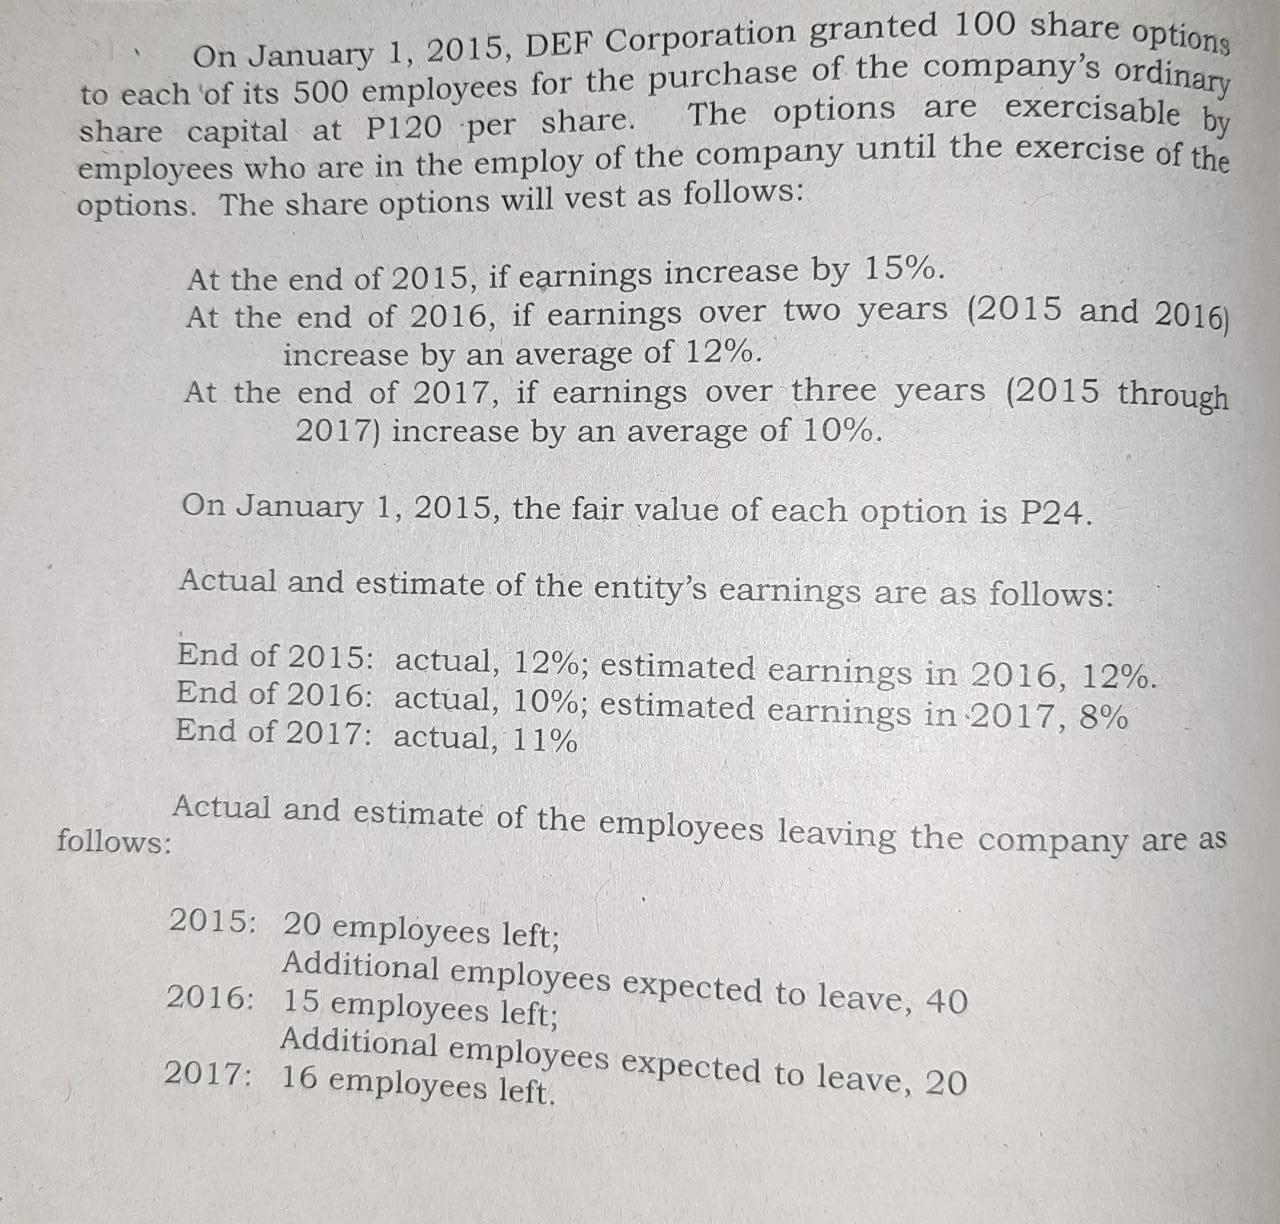 On January 1, 2015, DEF Corporation granted 100 share options to each of its 500 employees for the purchase